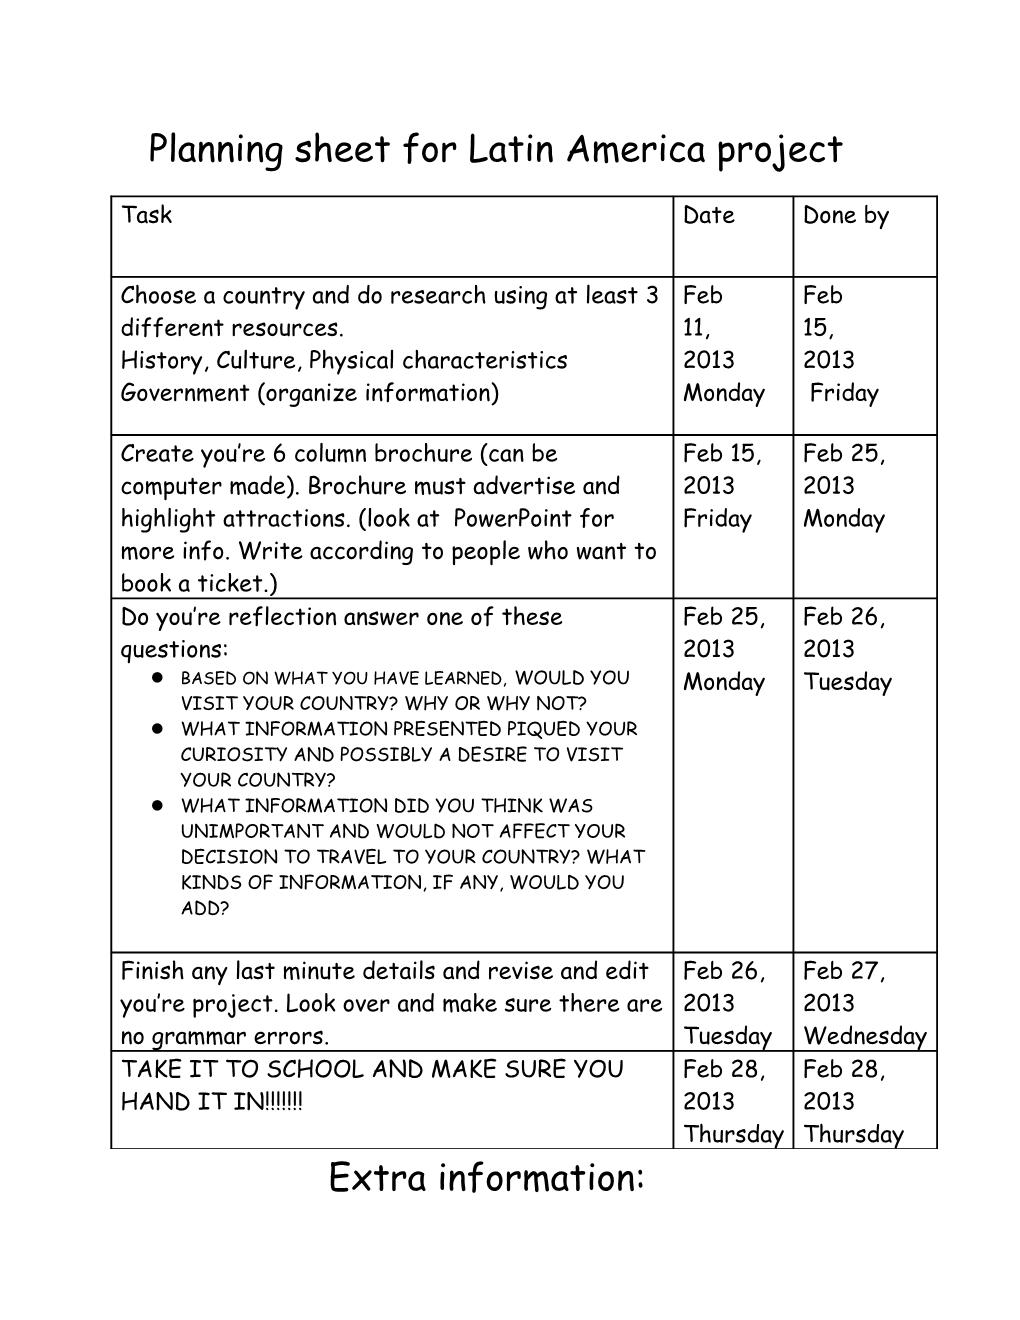 Planning Sheet for Latin America Project